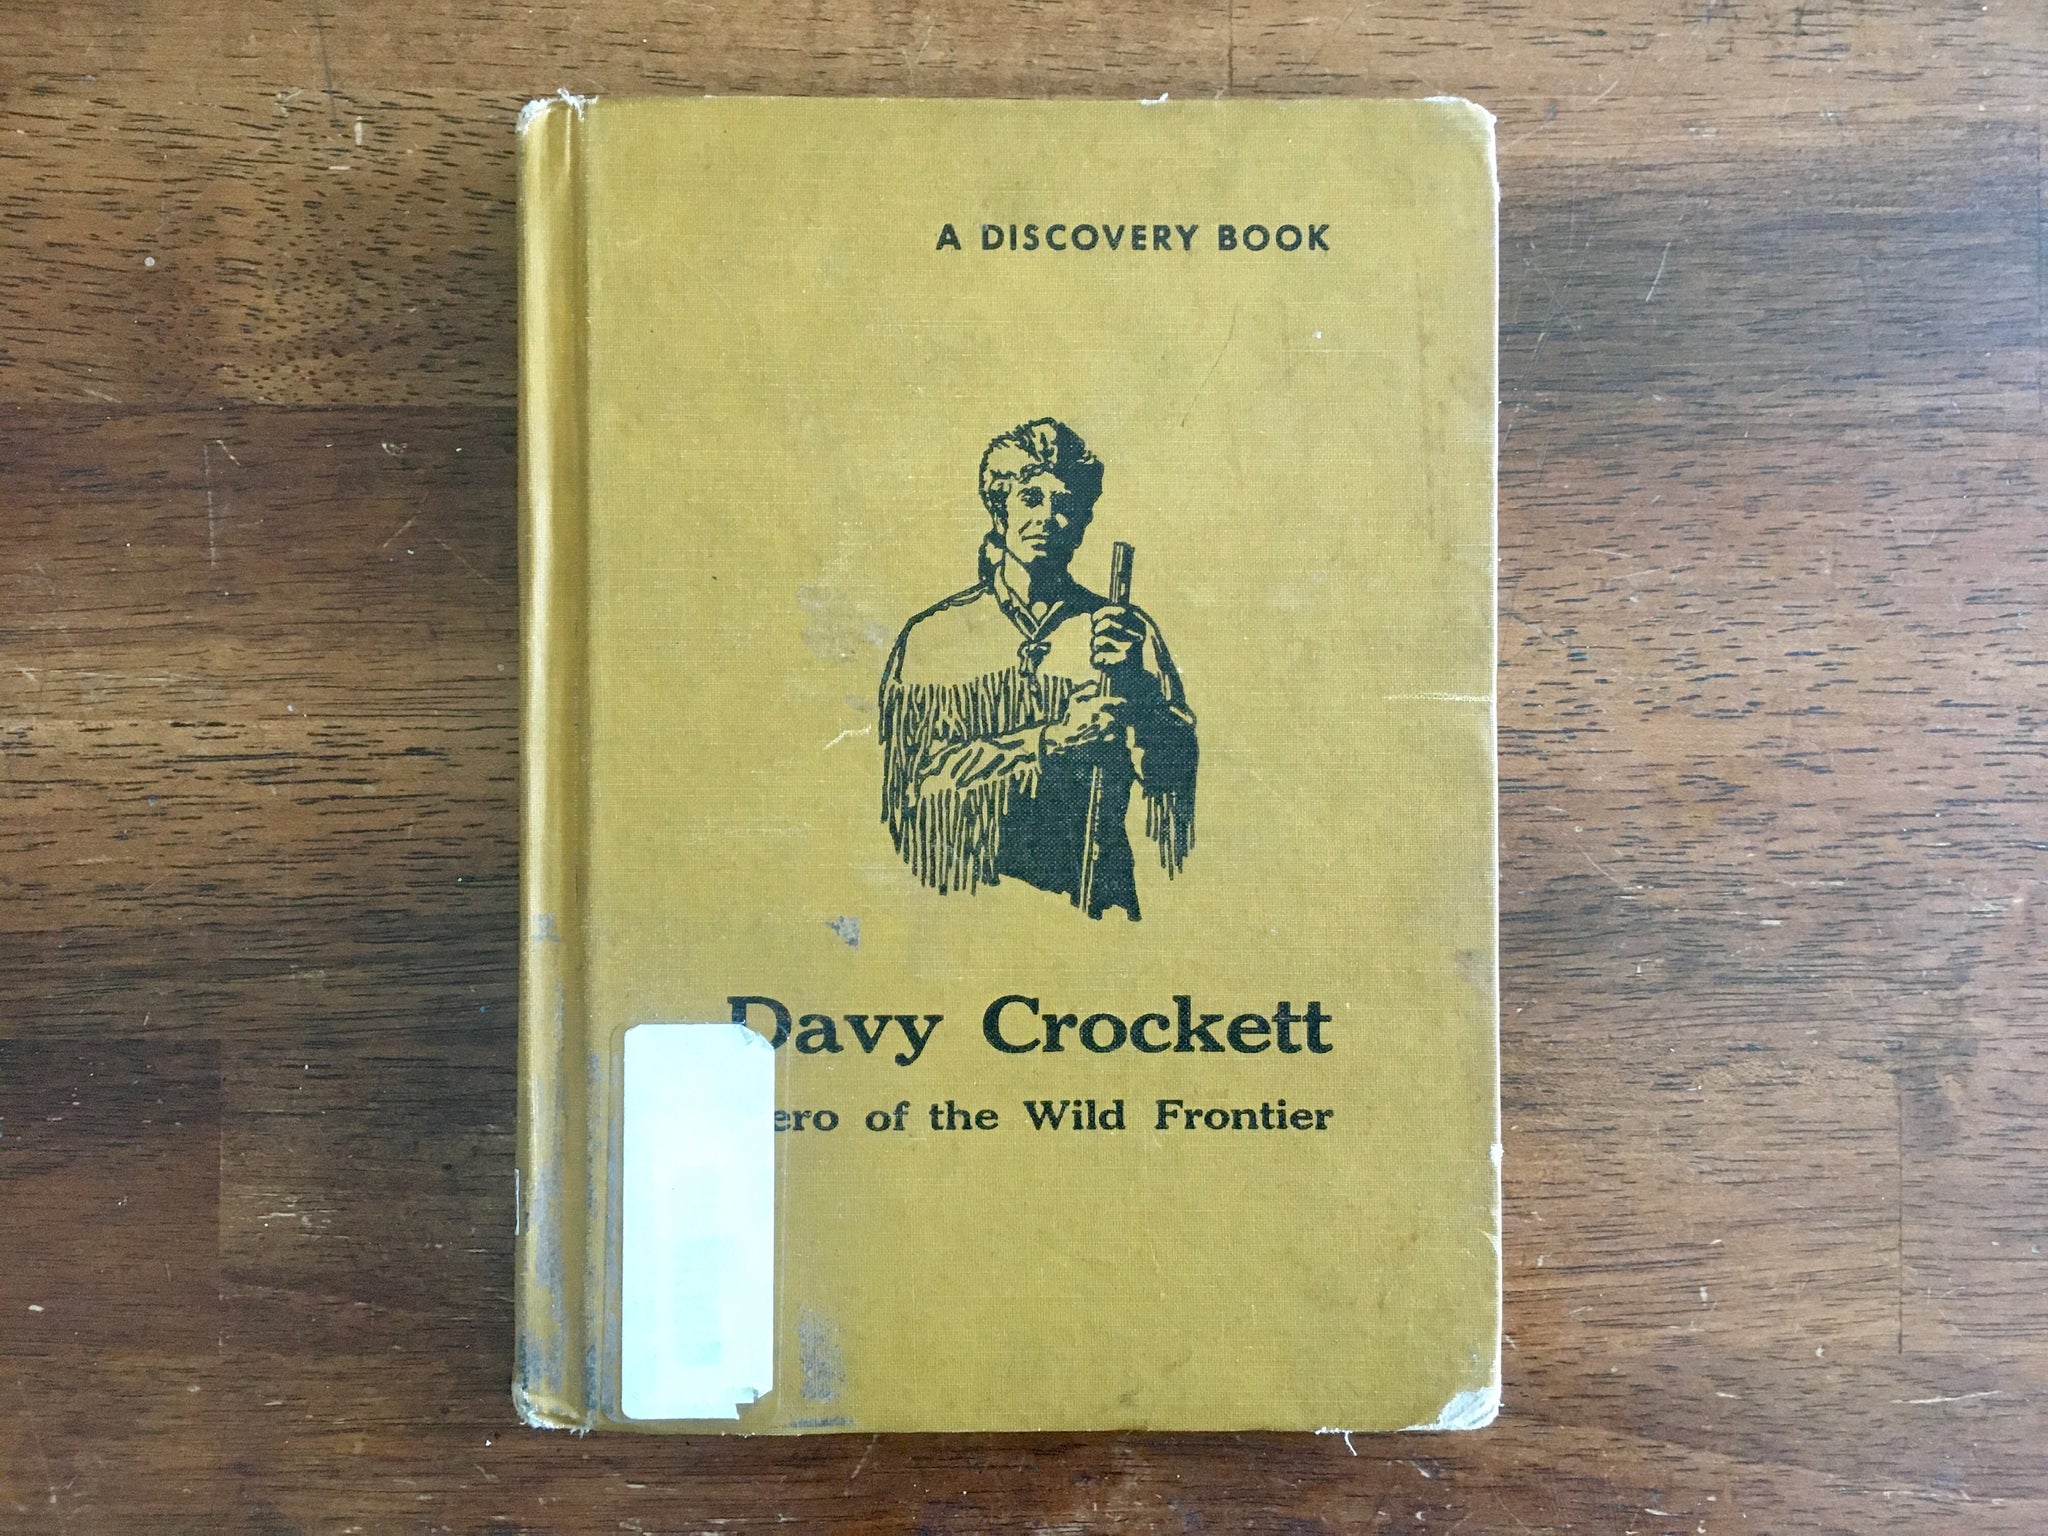 A　Hero　of　Book,　the　Wild　Davy　Discovery　Frontier,　19　–　Crockett:　Vintage